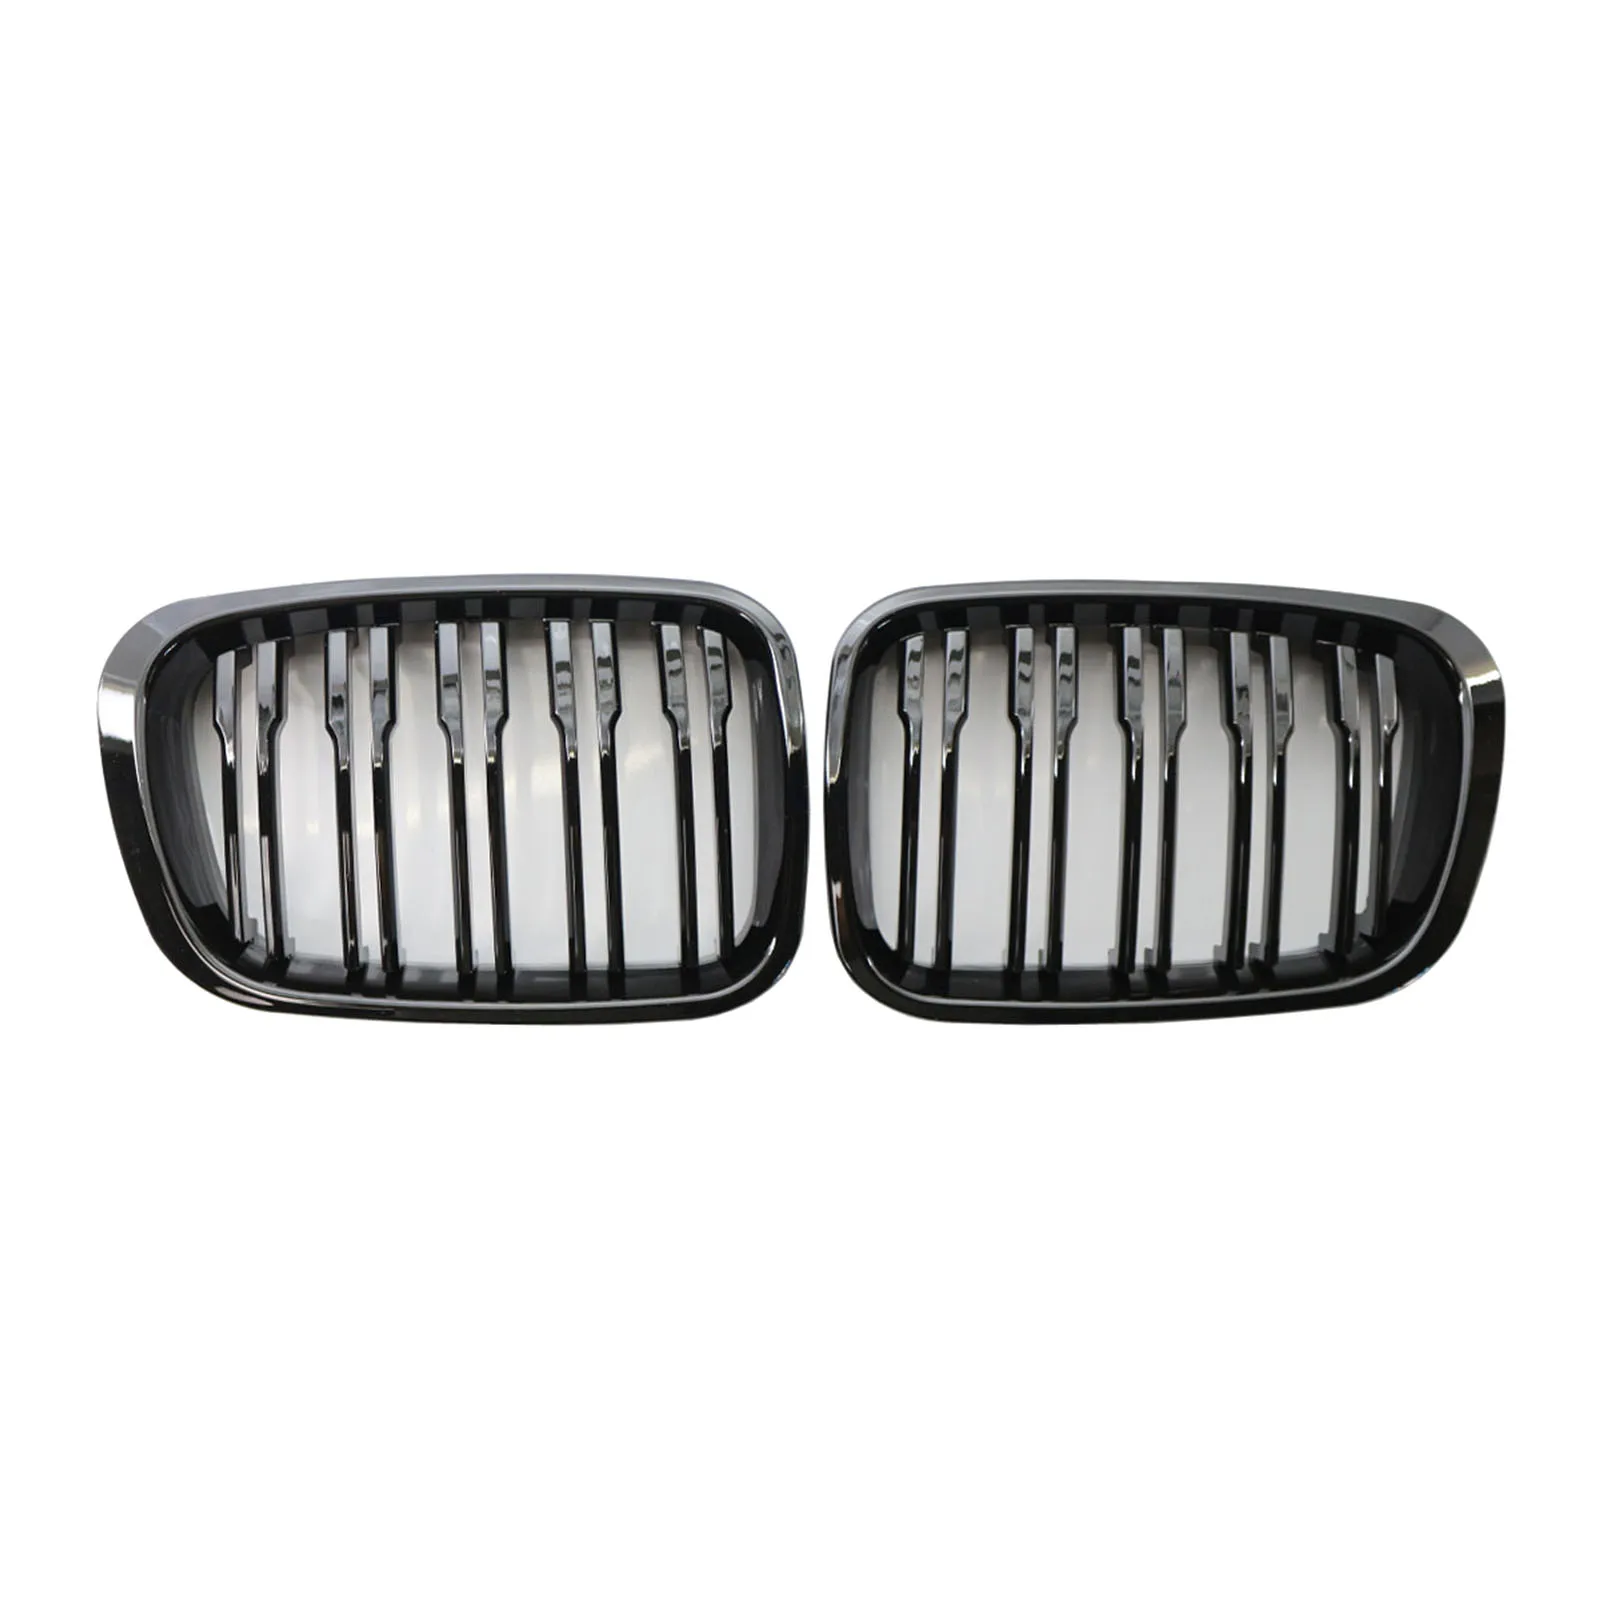 Glossy Black Double Line Front Hood Kidney LH RH Grille Replacement for  E46 4 Door 1998-2001 Sedan 320i 323i